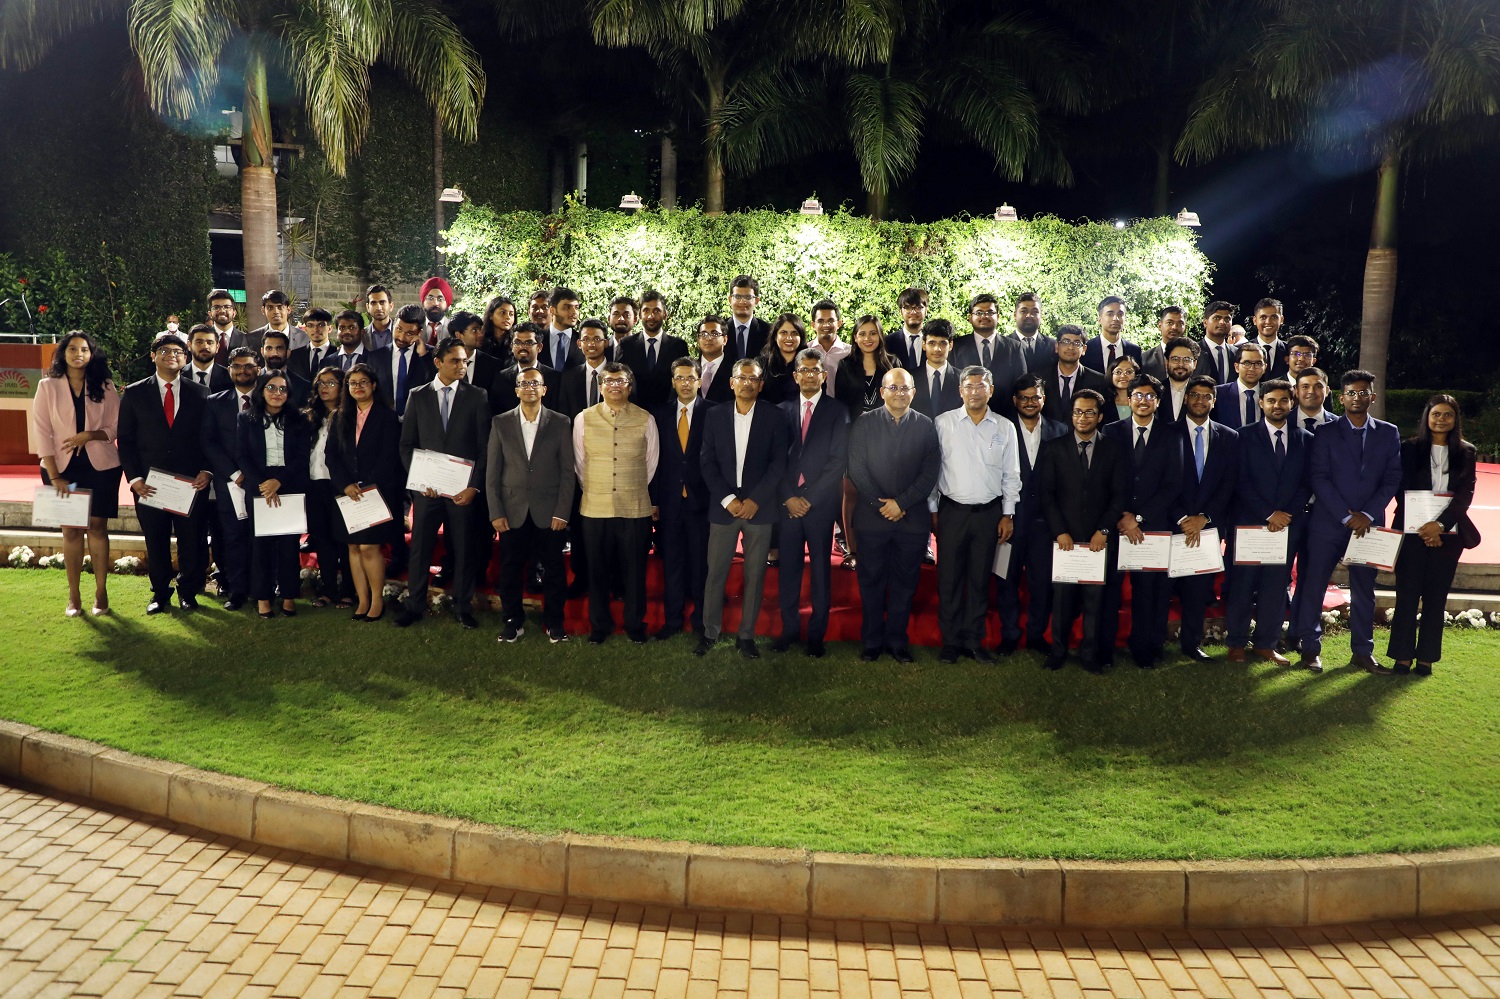 A group picture of the DML (Director’s Merit List) and DHL (Director’s Honorary List) award winners along with the Chief Guest, NS Kannan, CEO, ICICI Prudential, Distinguished Alumni Award recipients Vipul Parekh (PGP 1988), Co-Founder of bigbasket.com, and Saugata Gupta (PGP 1991), Managing Director and CEO, Marico Limited, Prof. Rishikesha T Krishnan, Director, IIM Bangalore, and Prof. R Srinivasan, Chairperson, PGP and PGP(BA).